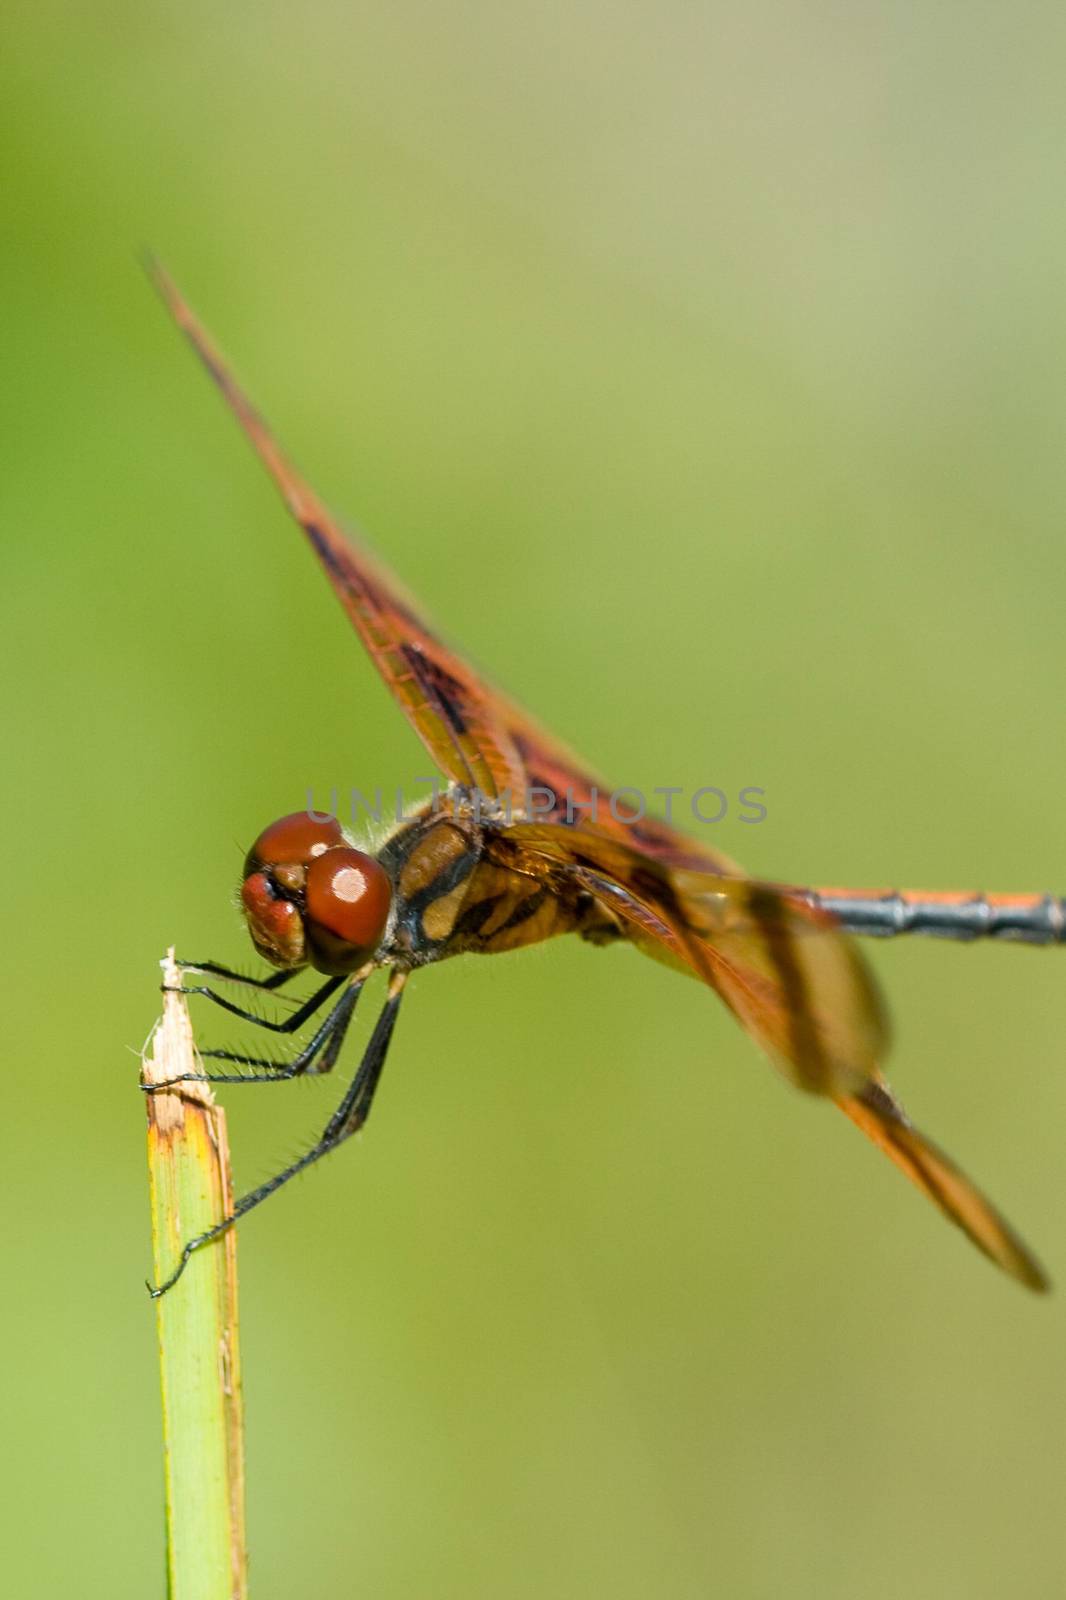 Brown dragonfly by CelsoDiniz